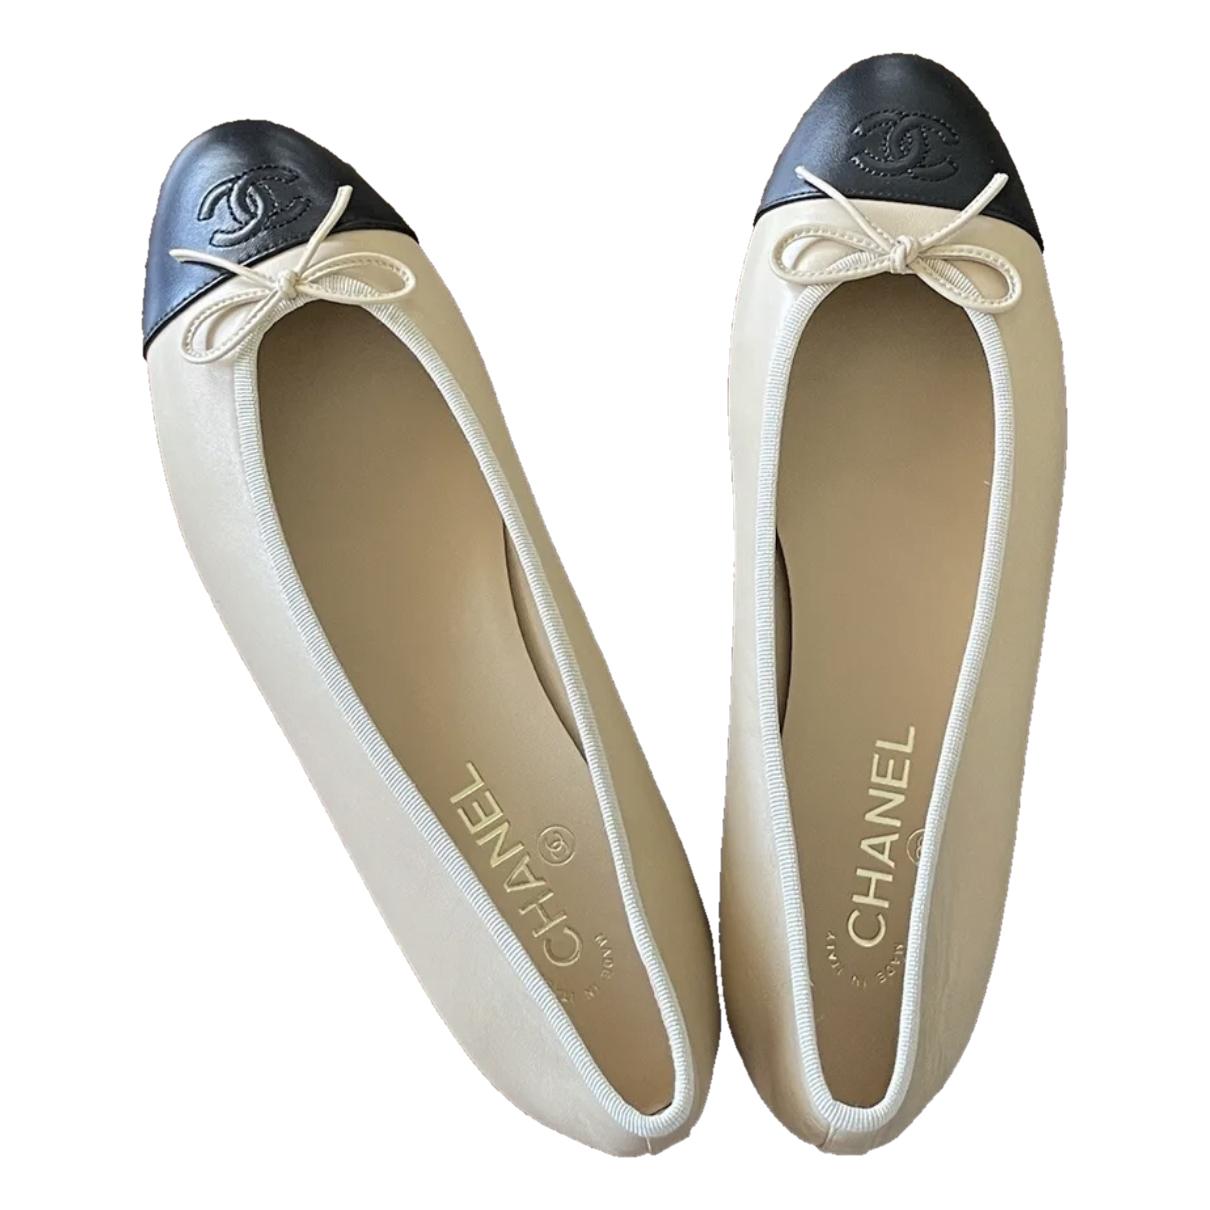 Leather ballet flats Chanel Beige size 36.5 EU in Leather - 35157942